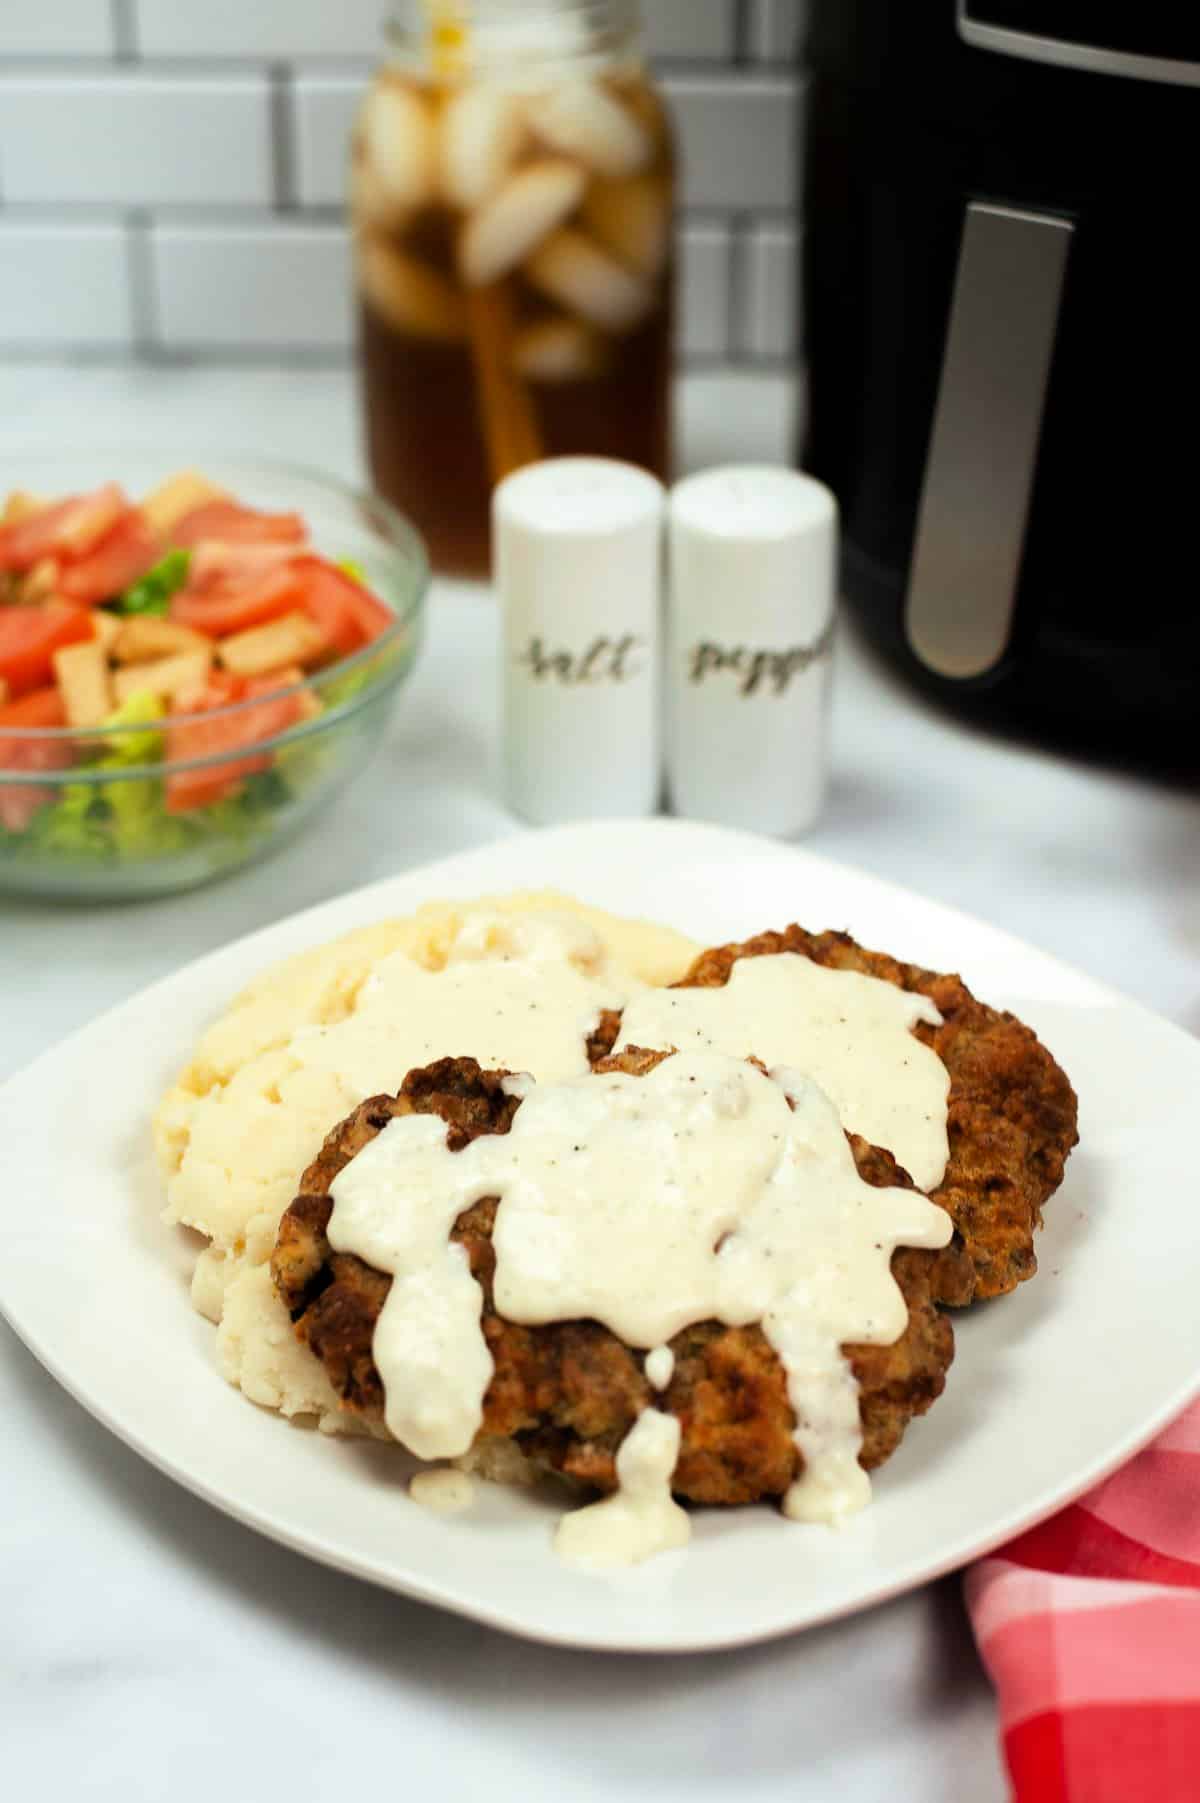 chicken fried steak with gravy on a white plate with a bowl of salad, salt and pepper shakers, a pitcher of tea, and an air fryer in the background